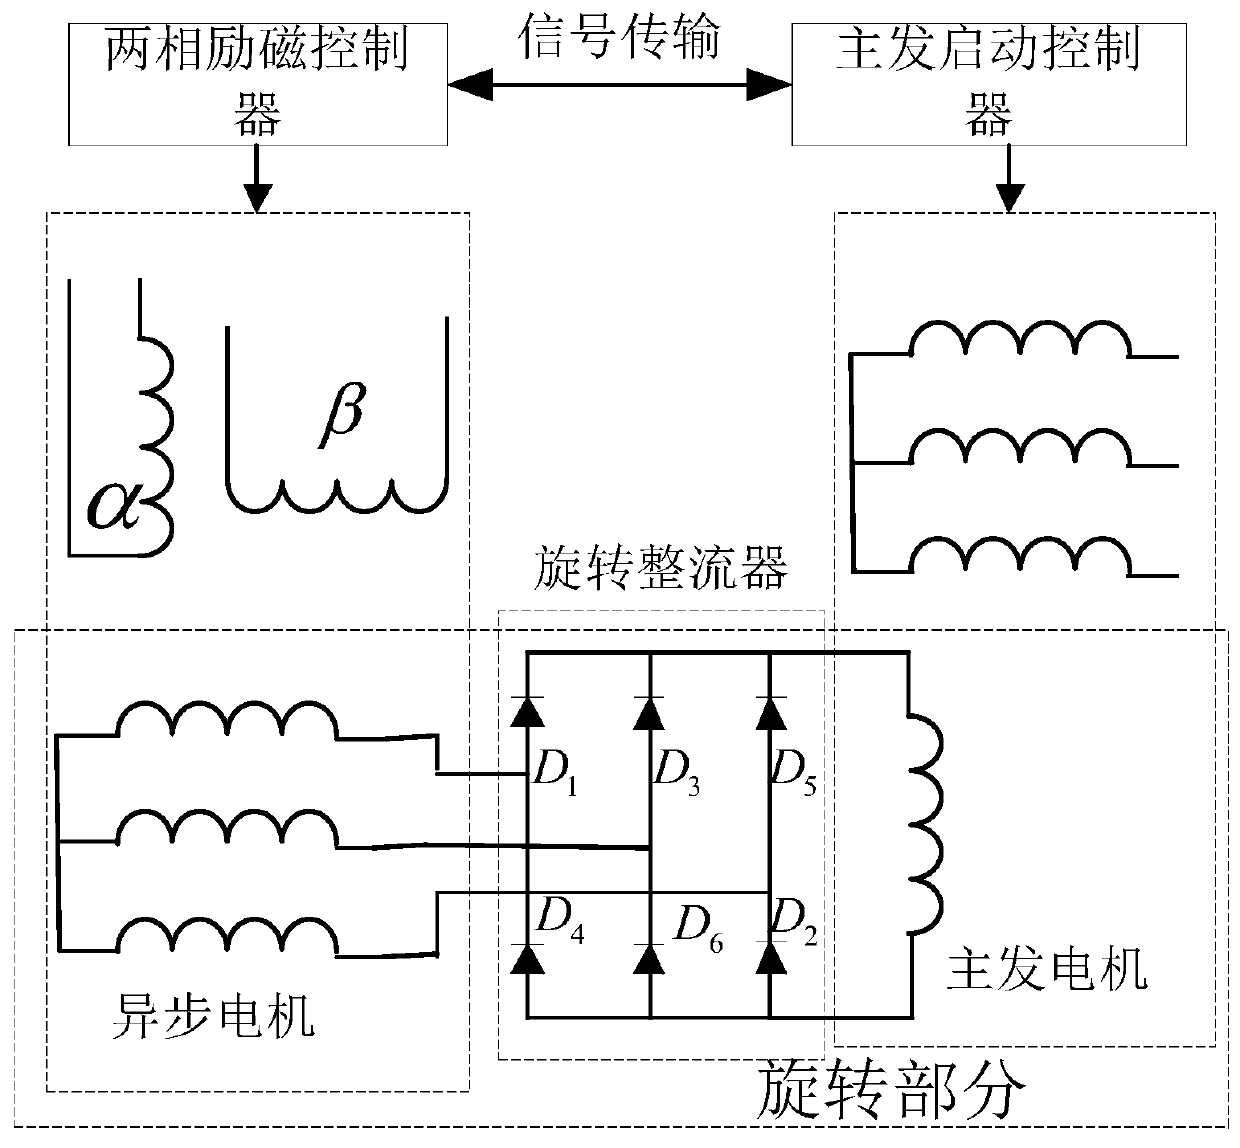 Fault detection and location method for rotary rectifier of aviation brushless electric excitation synchronous motor